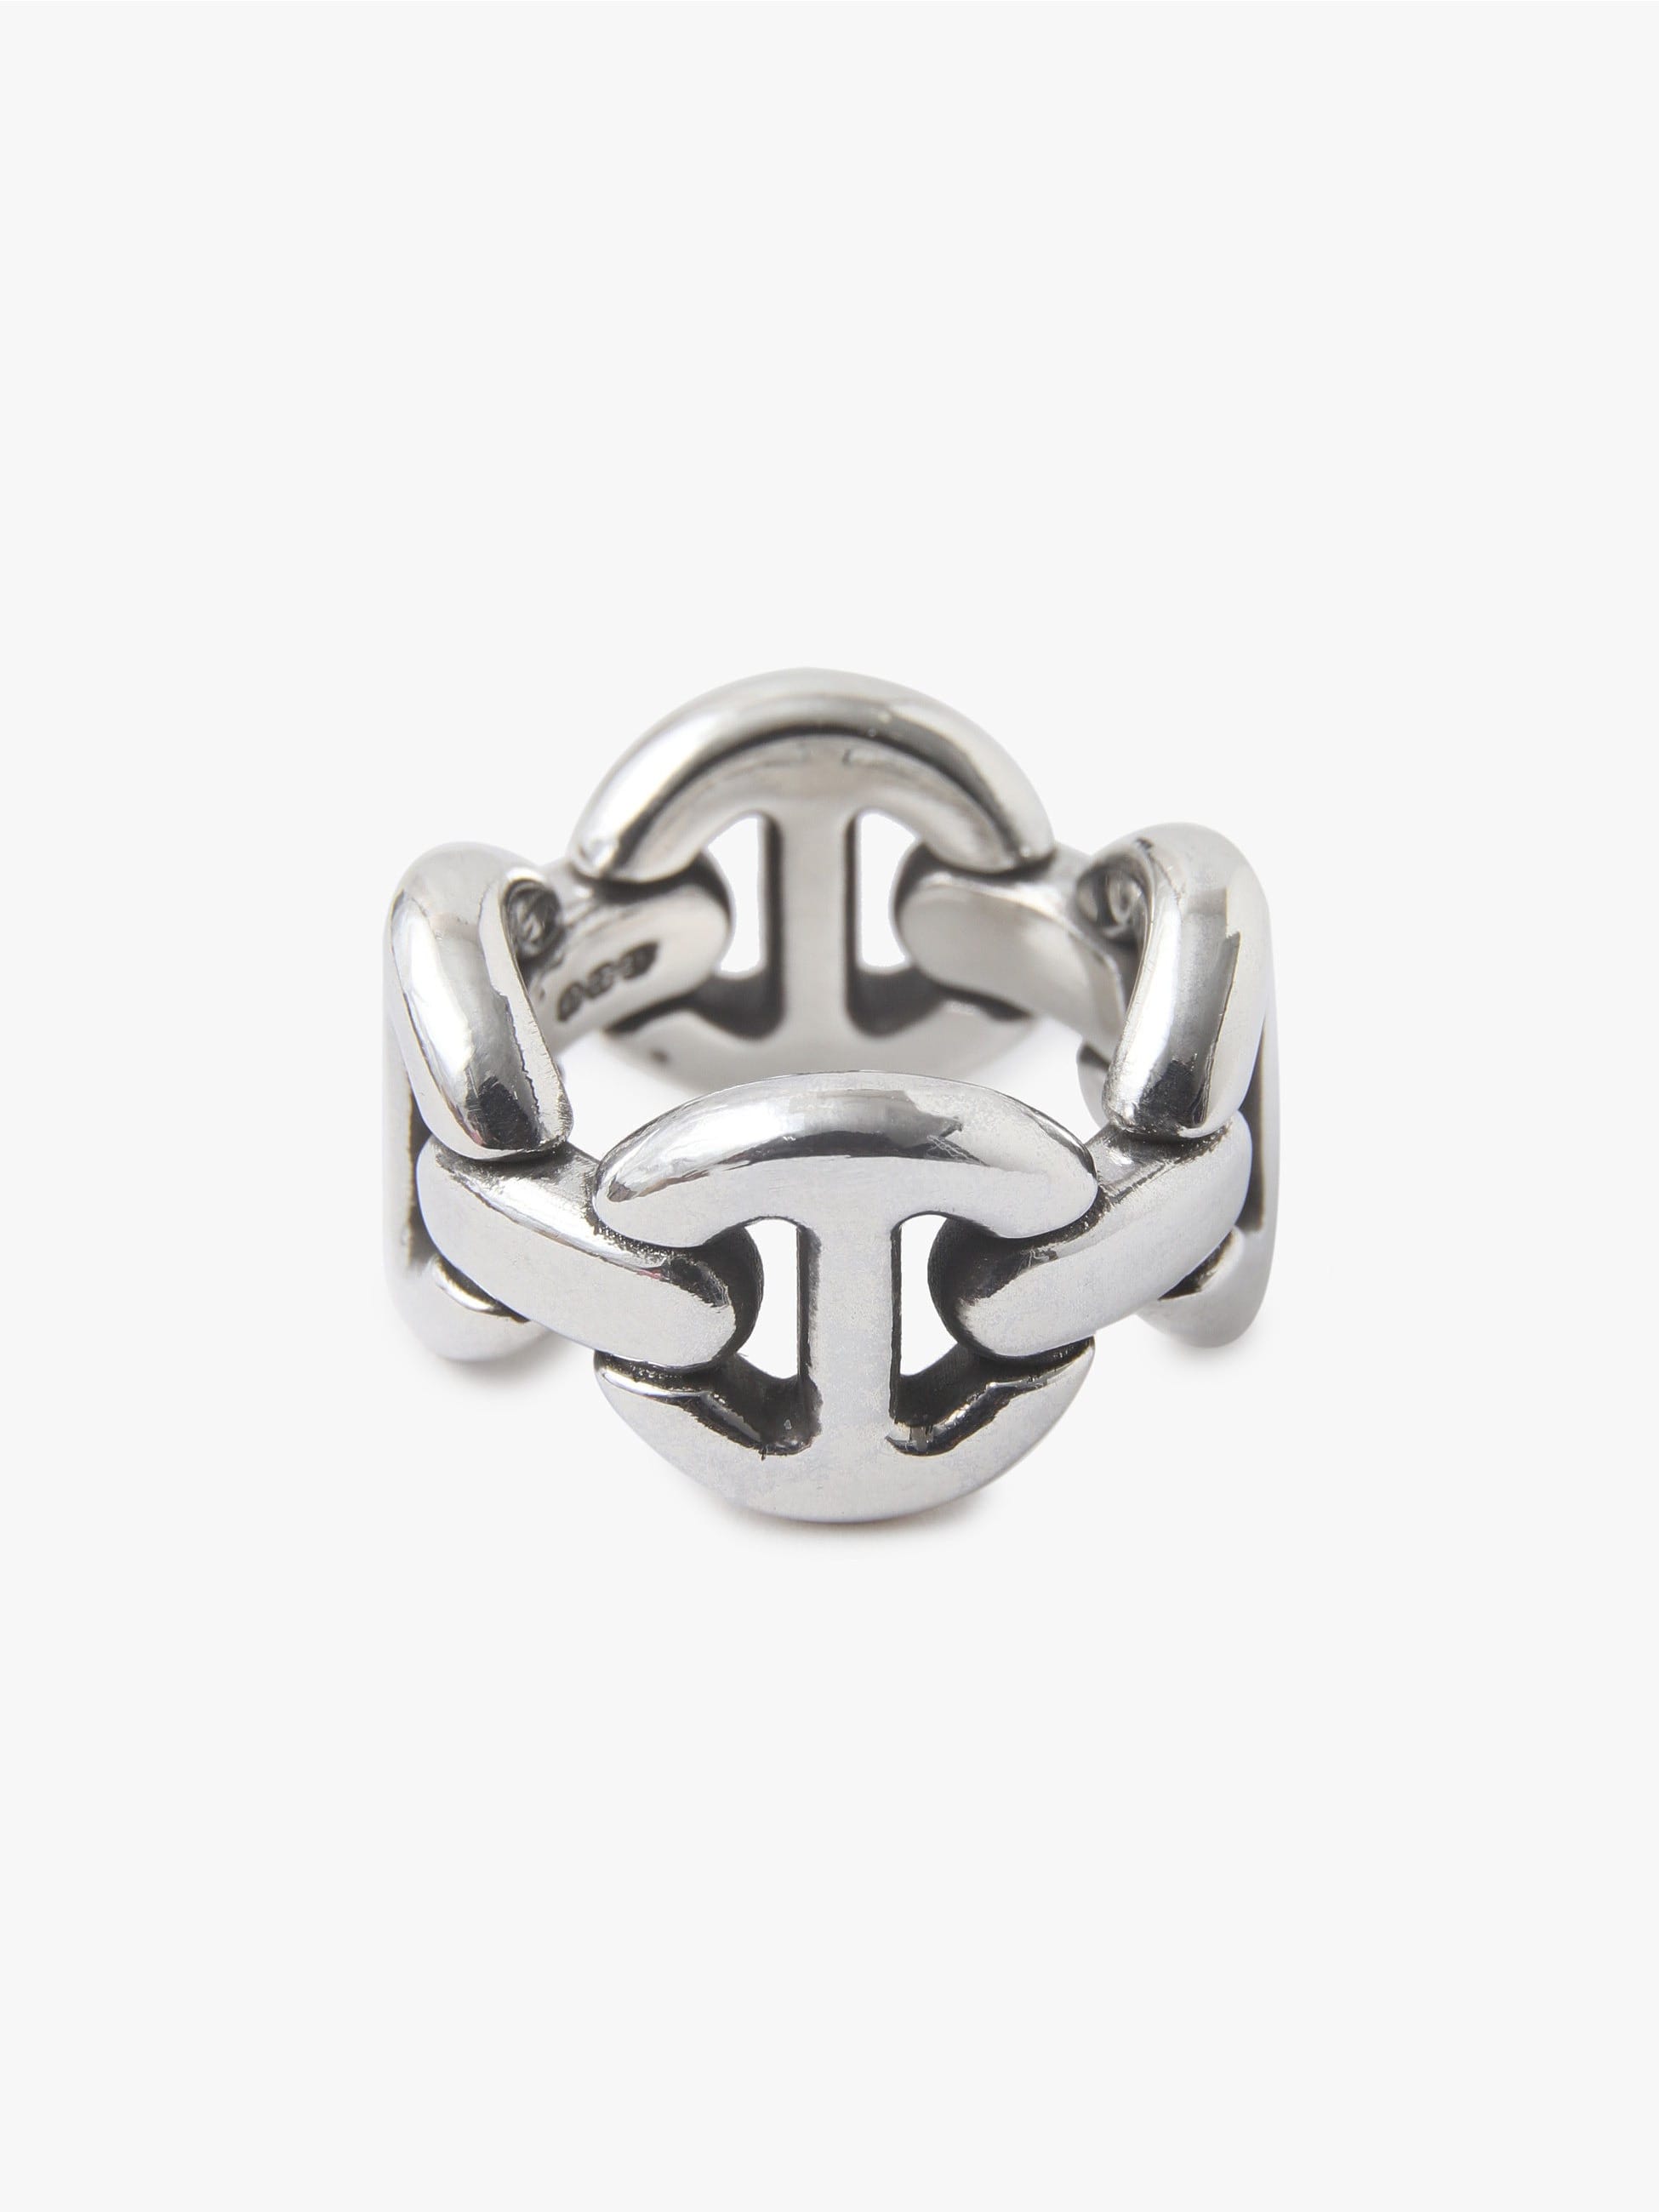 Quad Link Ring (Silver)